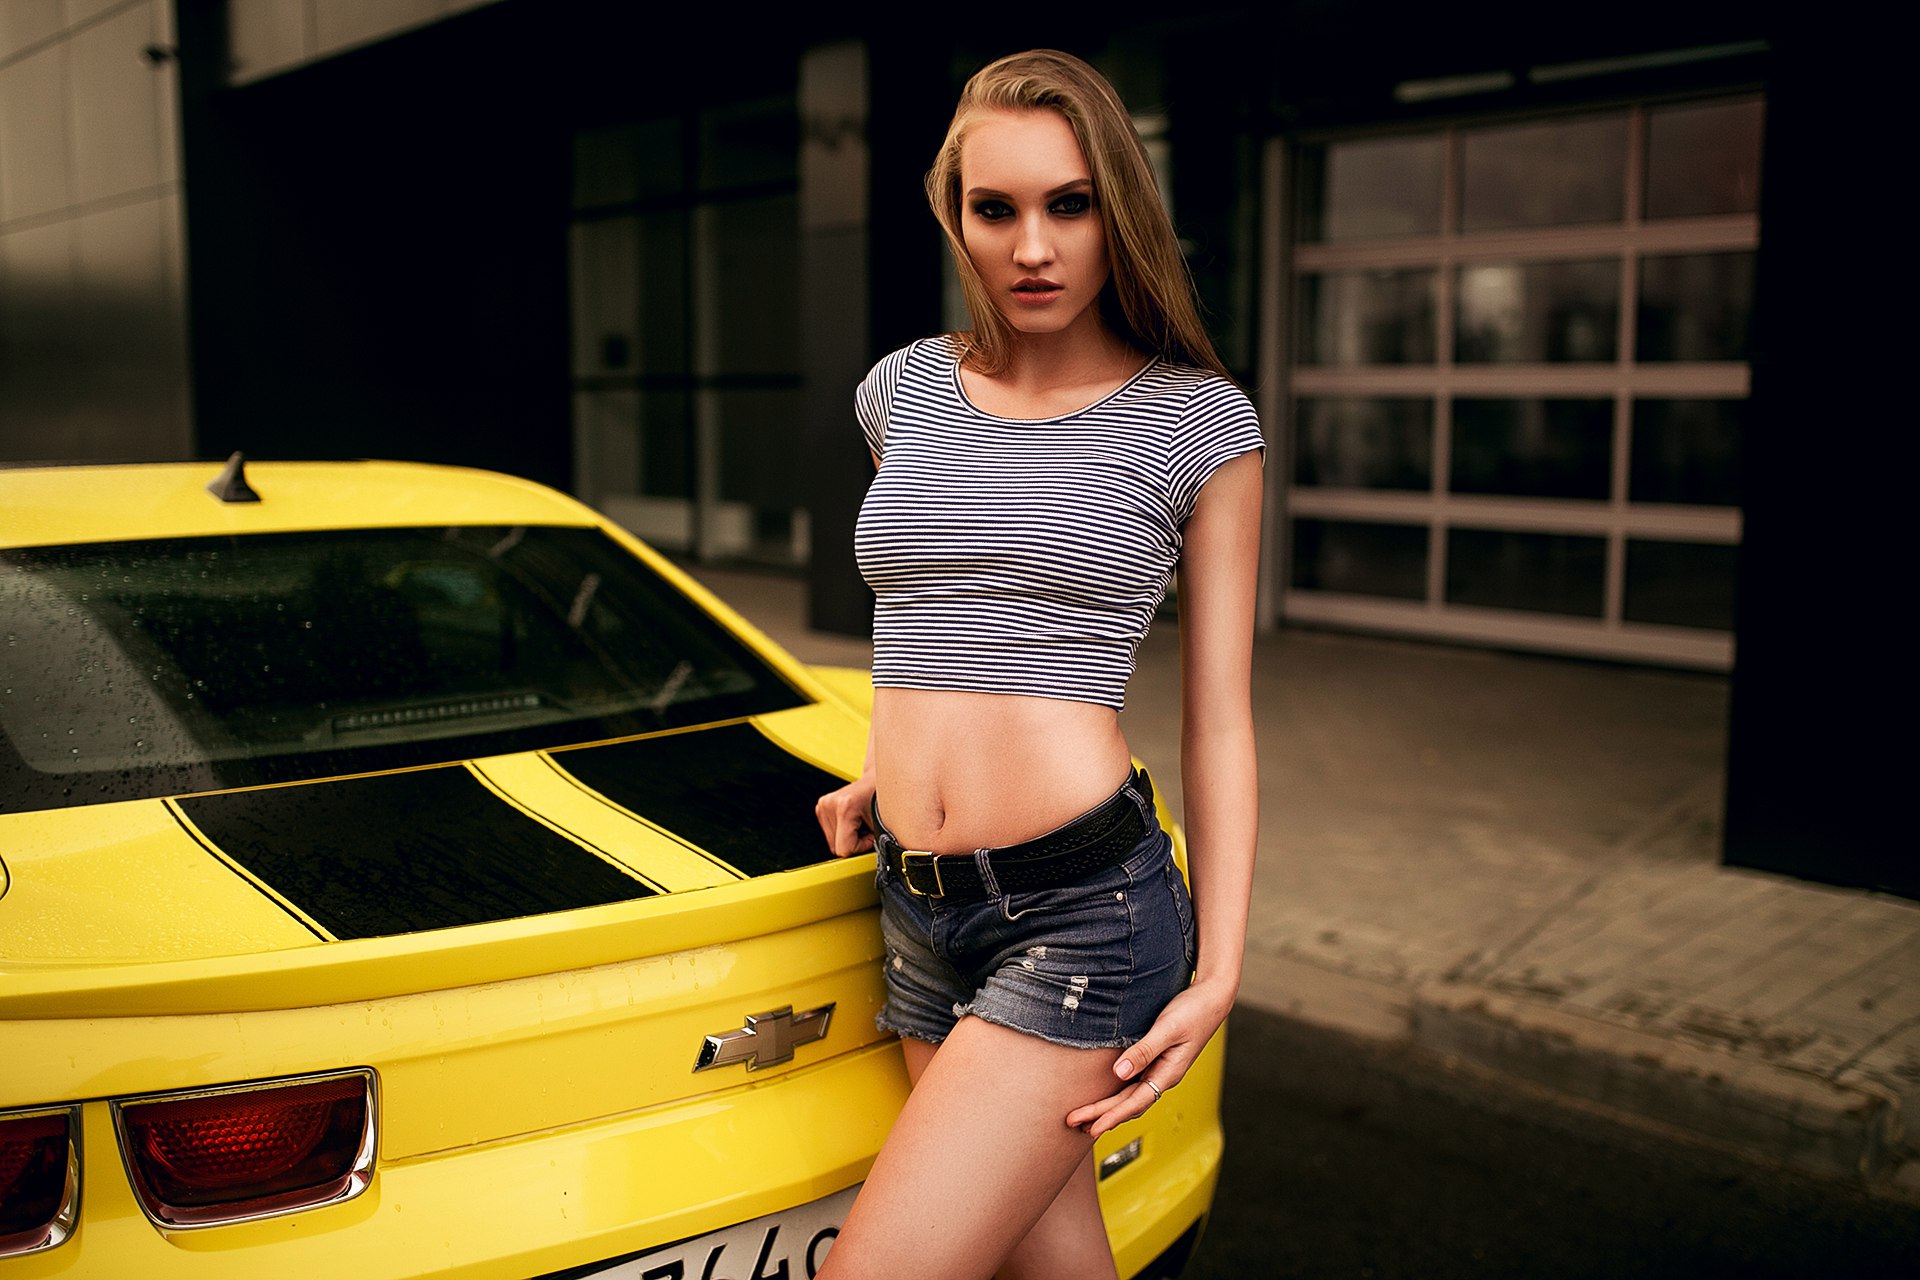 People 1920x1280 women blonde jean shorts Chevrolet Camaro women outdoors portrait brunette car belly T-shirt bare midriff Chevrolet muscle cars American cars women with cars